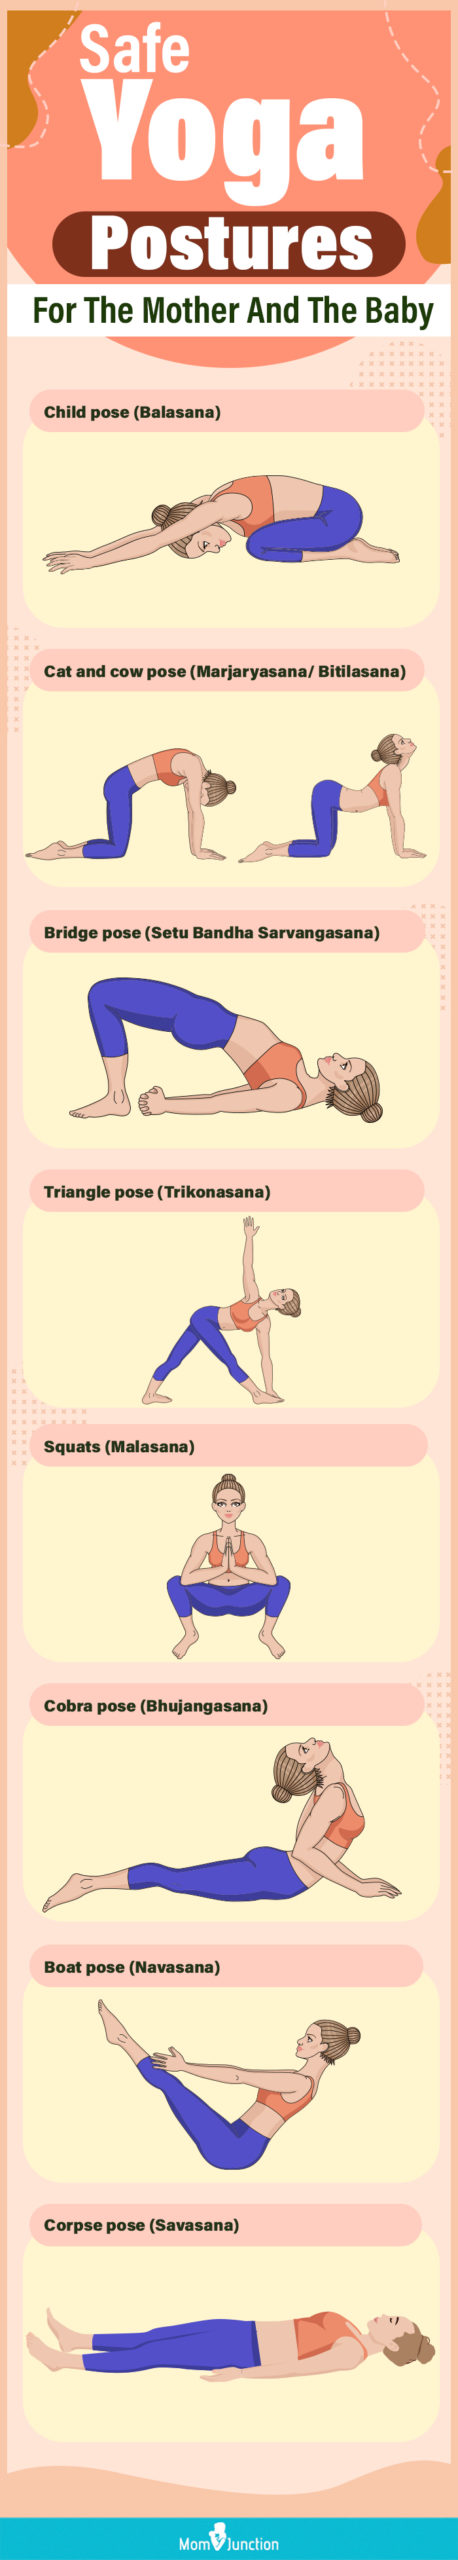 safe yoga postures for the mother and the baby (infographic)